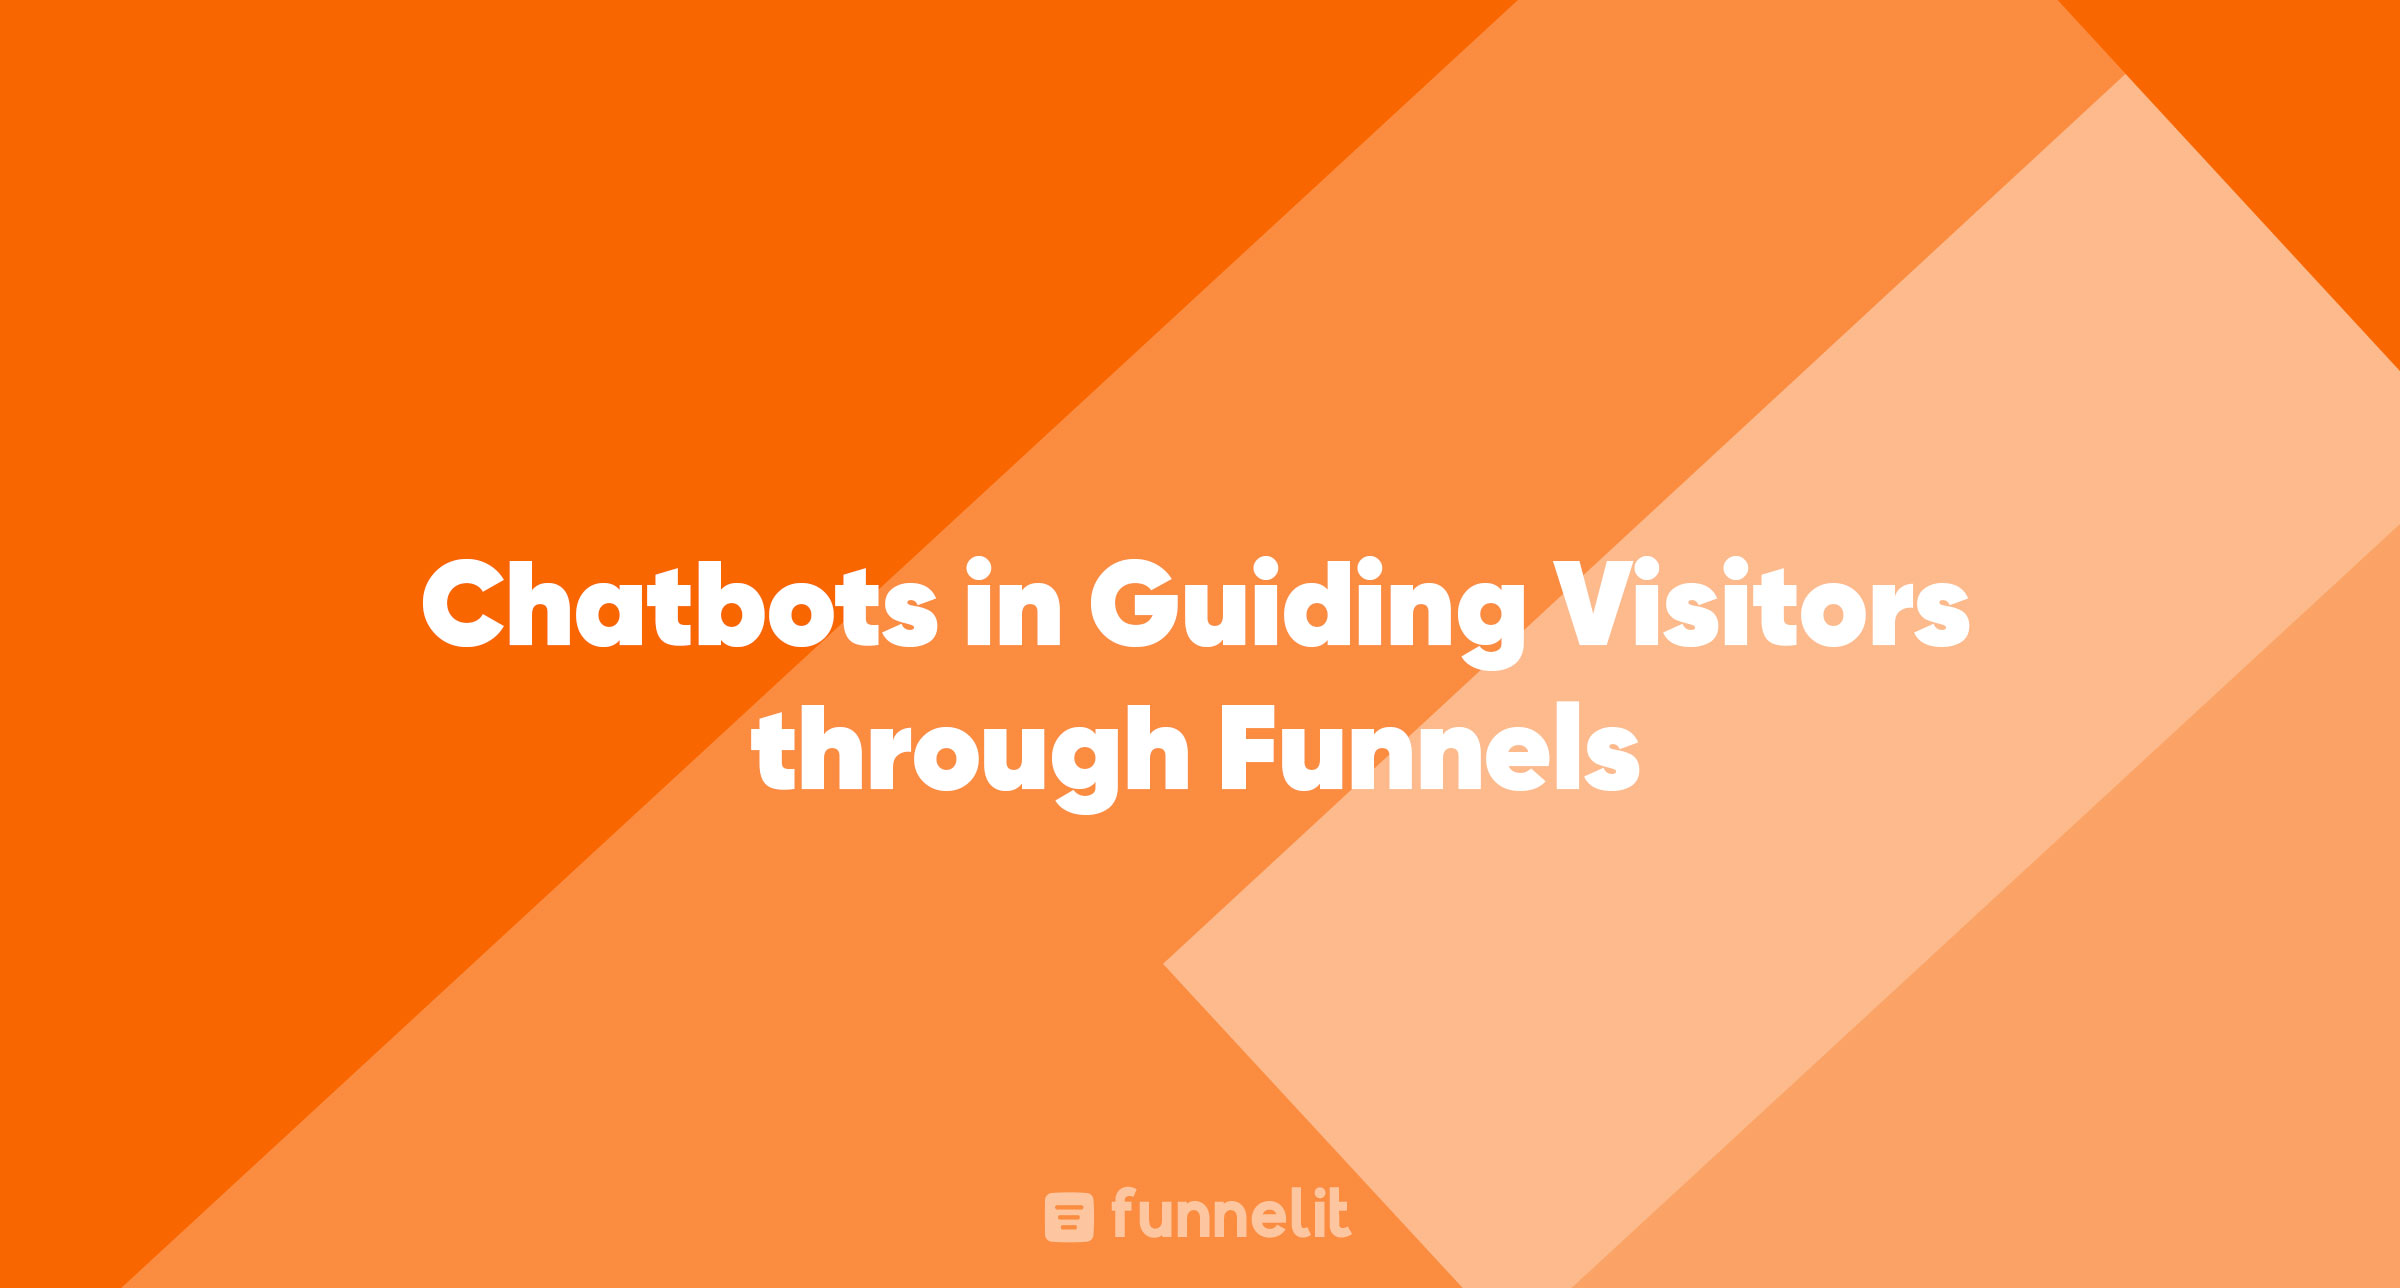 Article | Chatbots in Guiding Visitors through Funnels